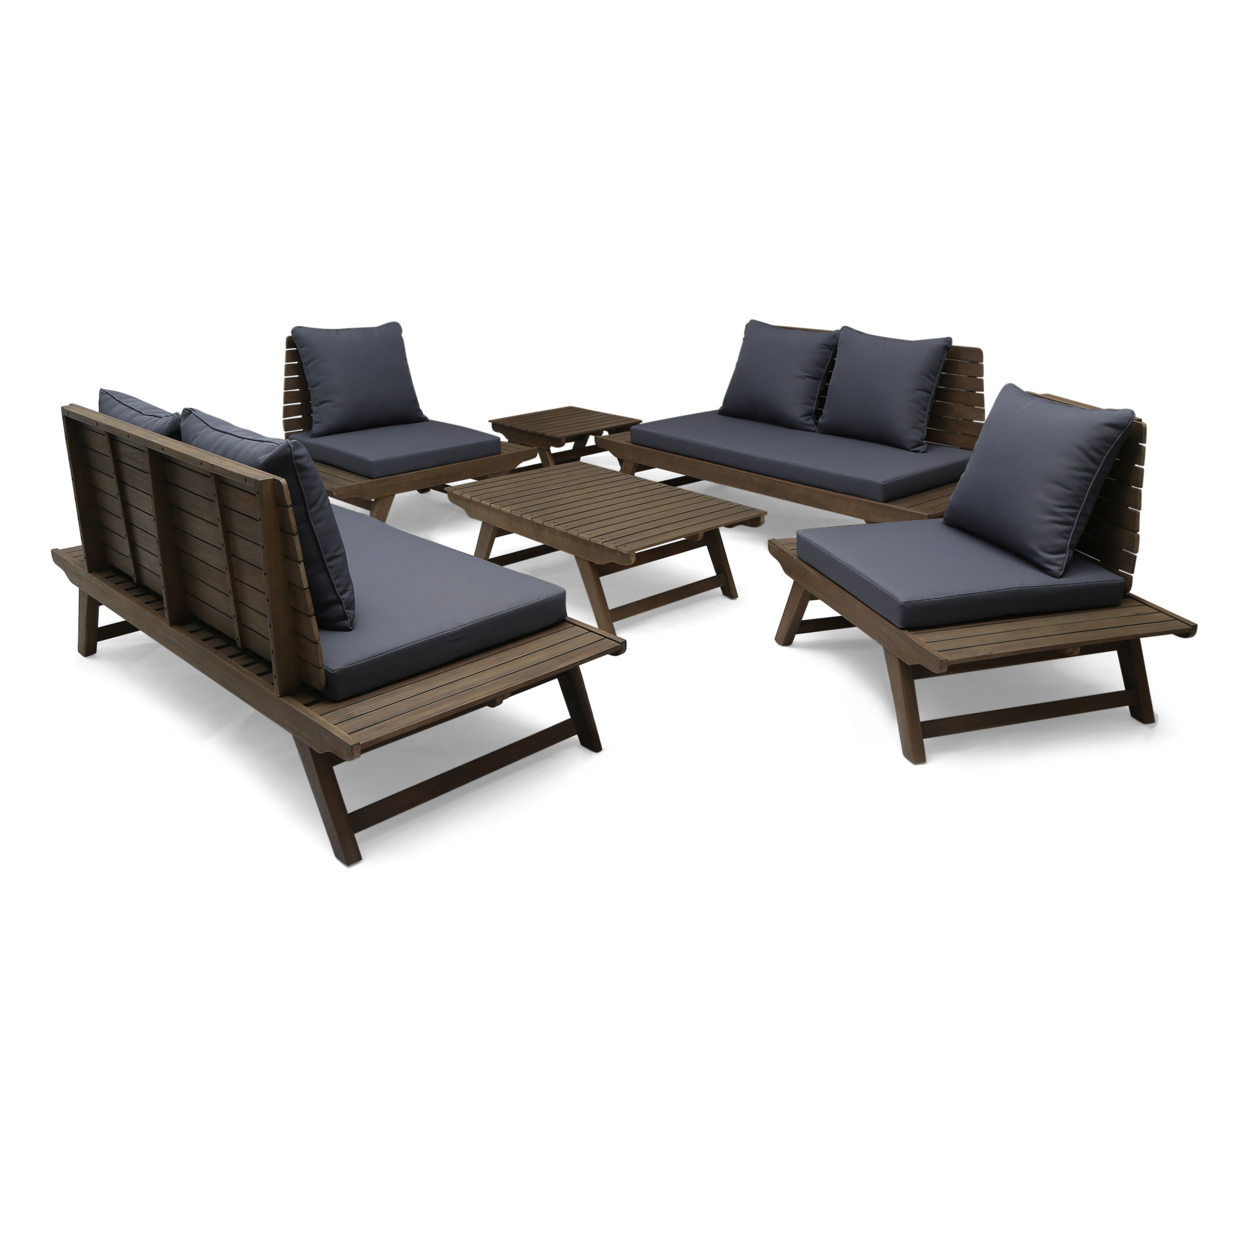 Jennifer Outdoor Acacia Wood 6 Seater Chat Set With Side Table And Coffee Table - Gray + Dark Gray